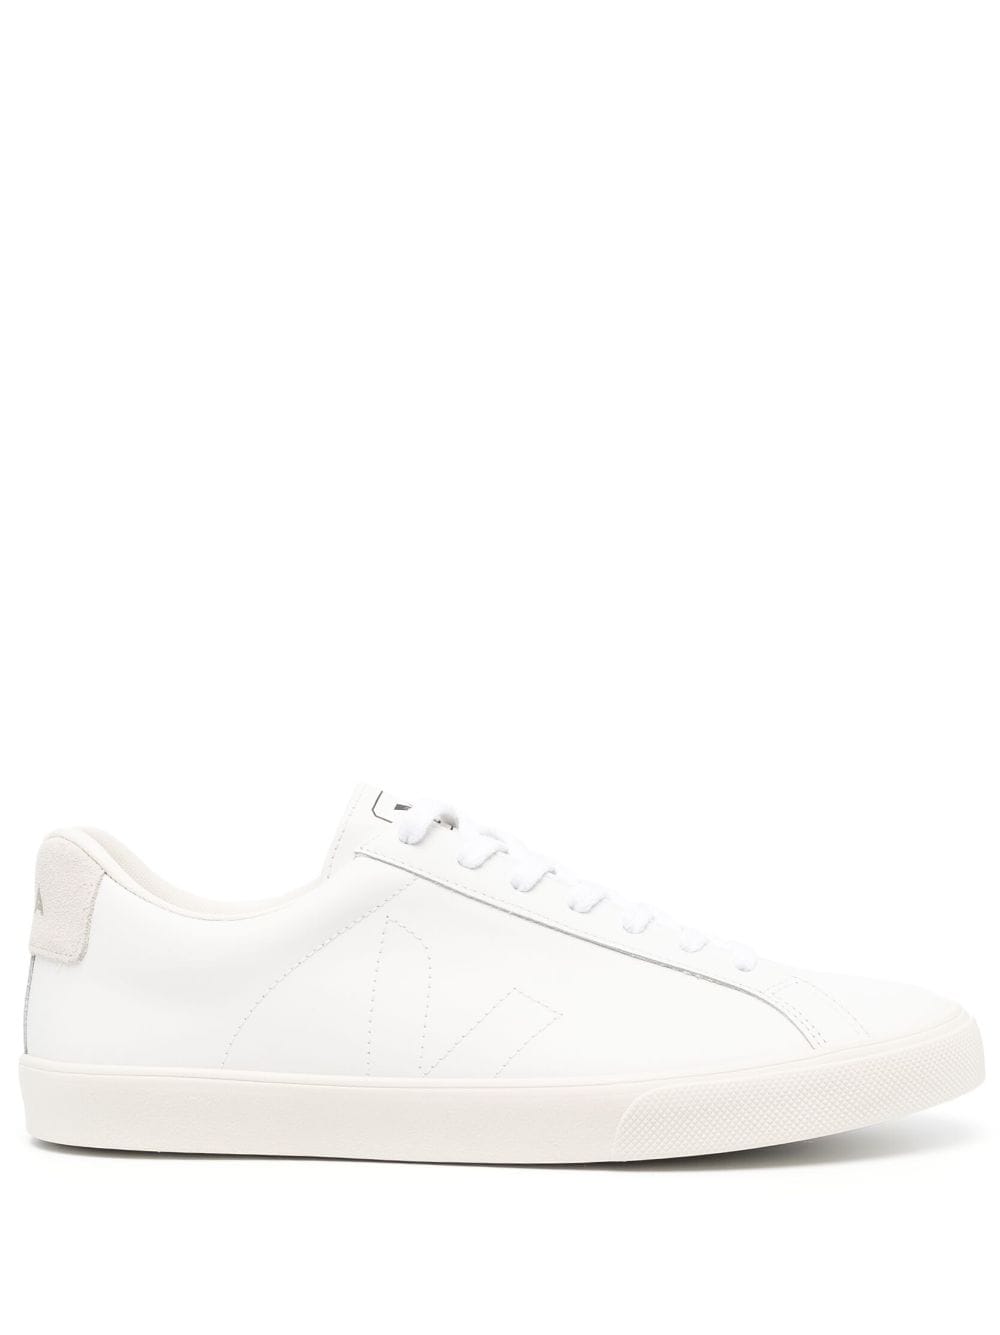 Image 1 of VEJA Esplar lace-up sneakers